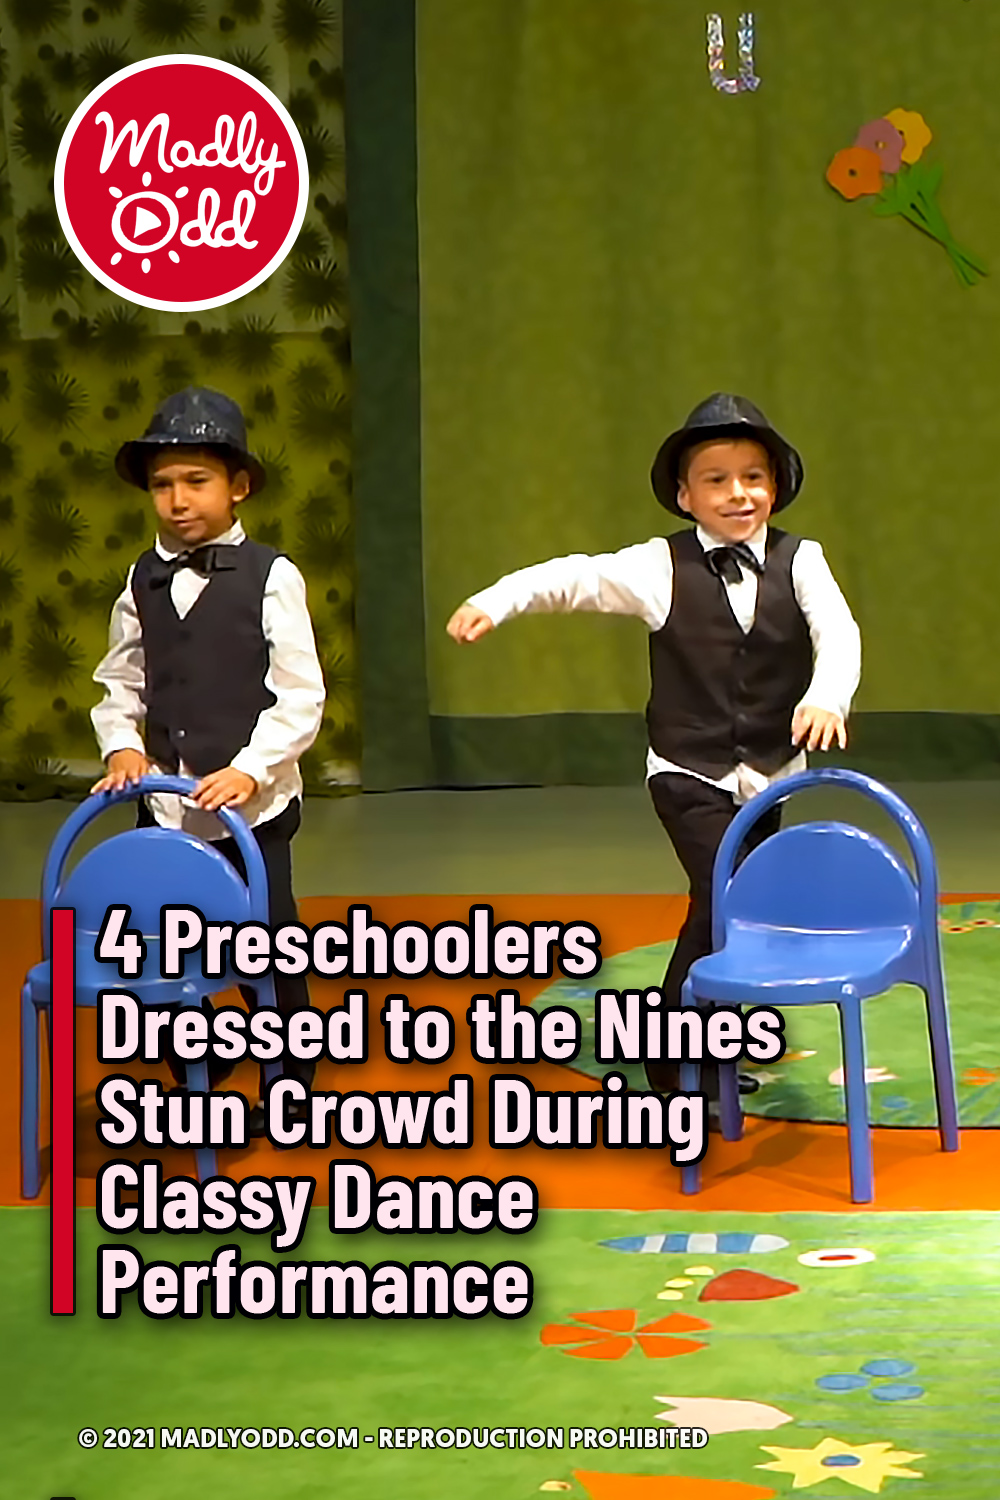 4 Preschoolers Dressed to the Nines Stun Crowd During Classy Dance Performance